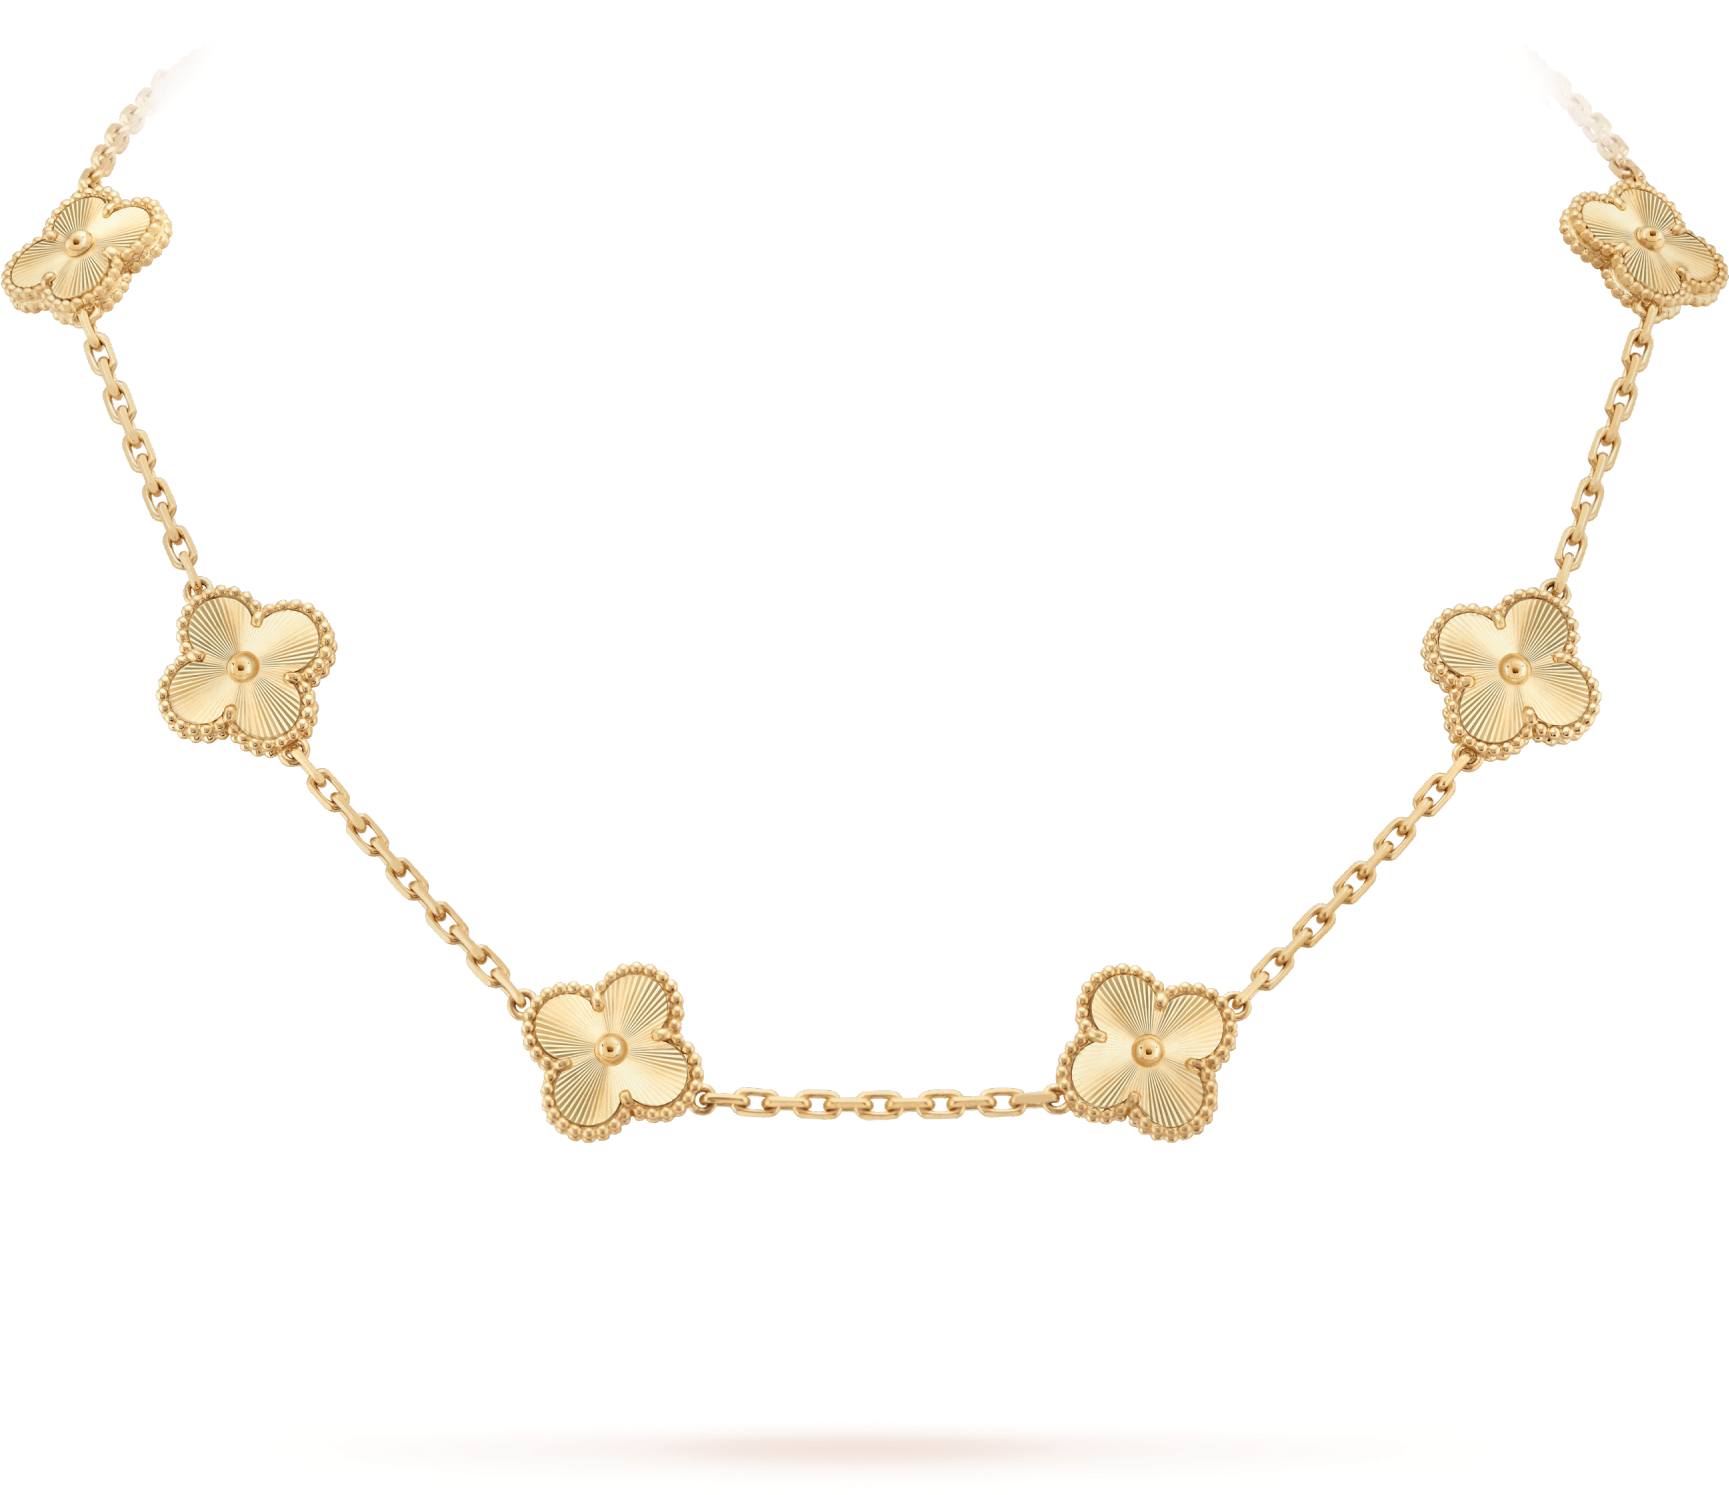 Ladies Golden Chain PNG Image Background